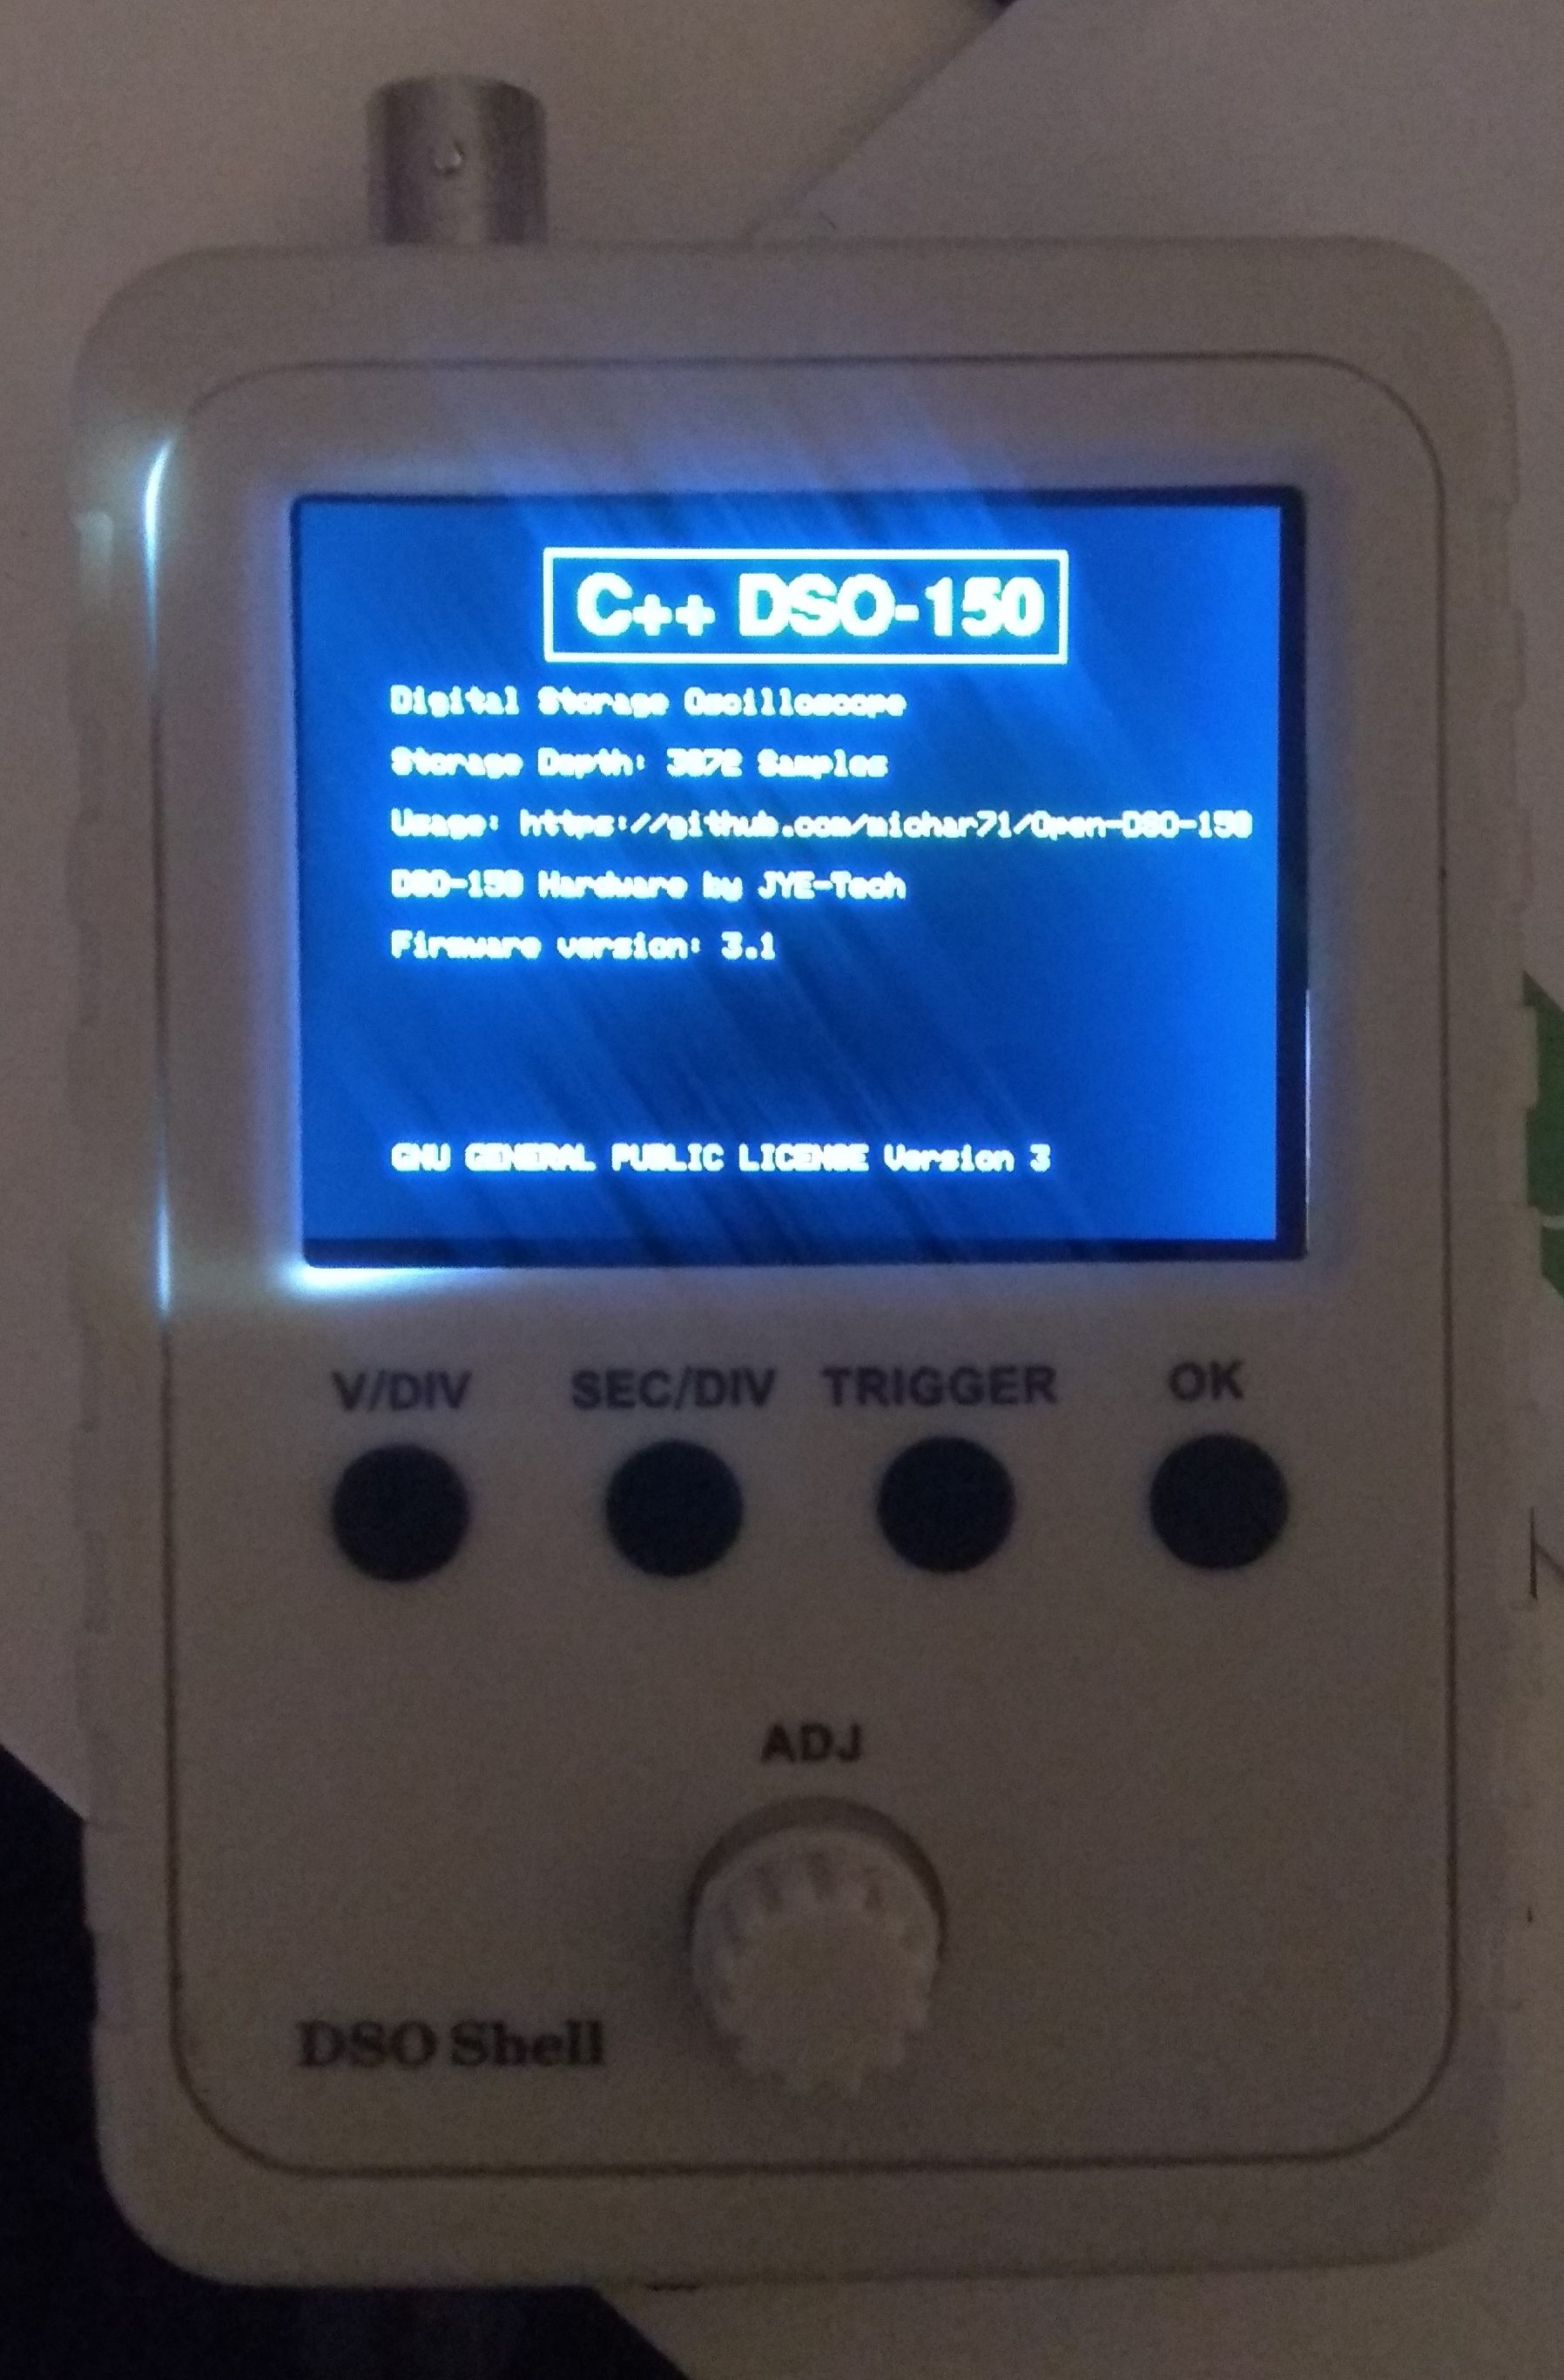 Adding Digital Channels to the DSO-150 Oscilloscope And Flashing New Firmware